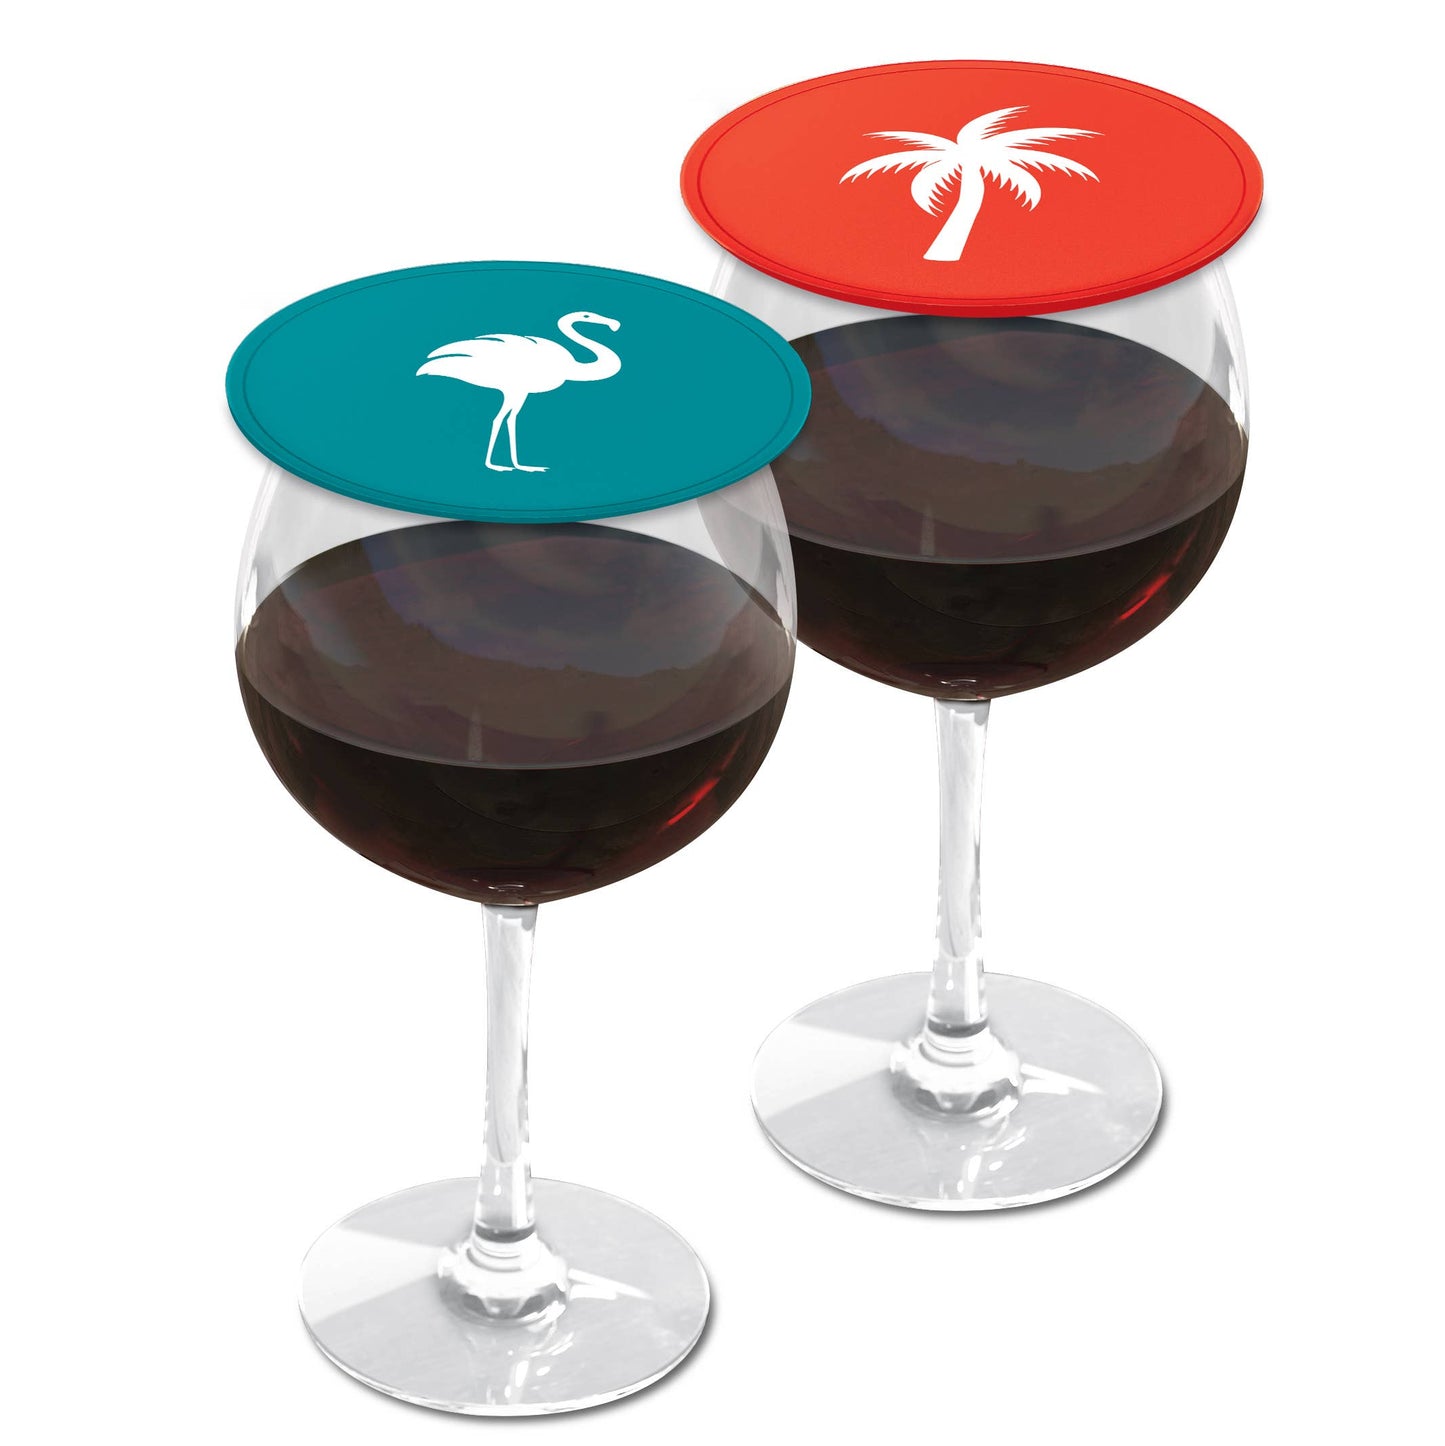 Drink Tops™ - TAP & SEAL Drink Covers - Flip Flop/Sunglasses